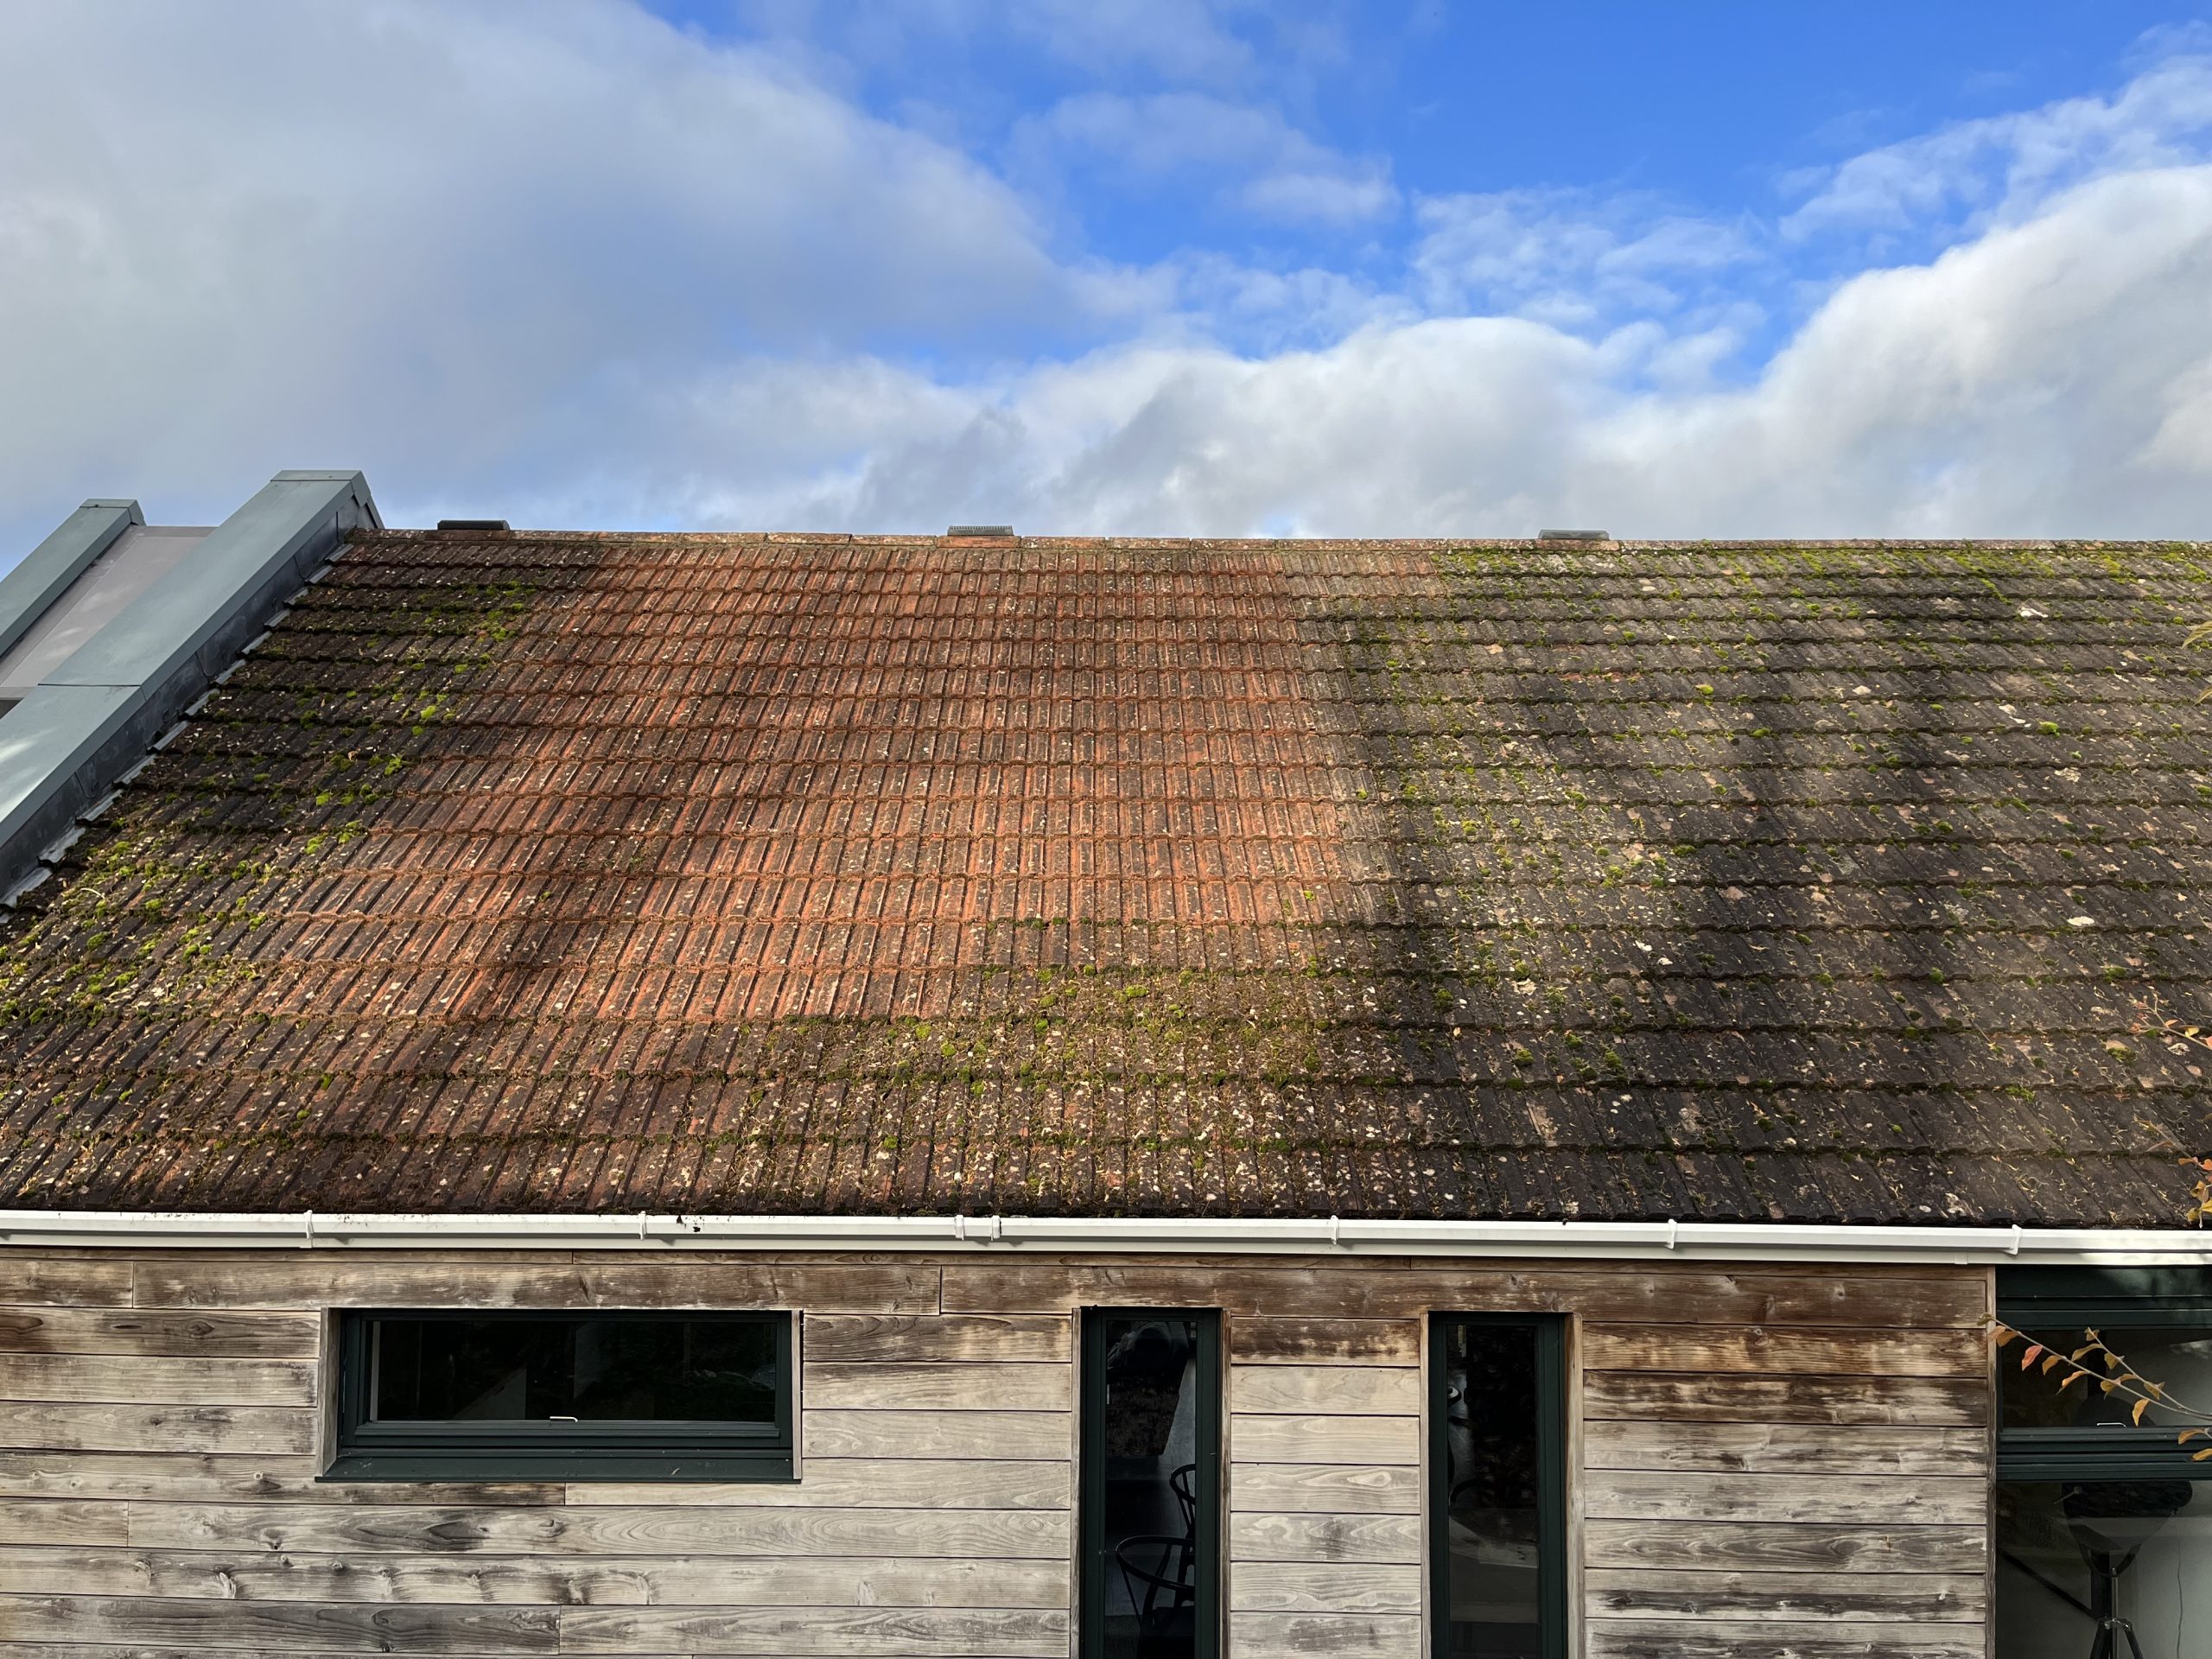 This is a roof we cleaned in Bath, it is a tile roof that is in the process of getting cleaned by scraping the moss off and then applying a biocide.